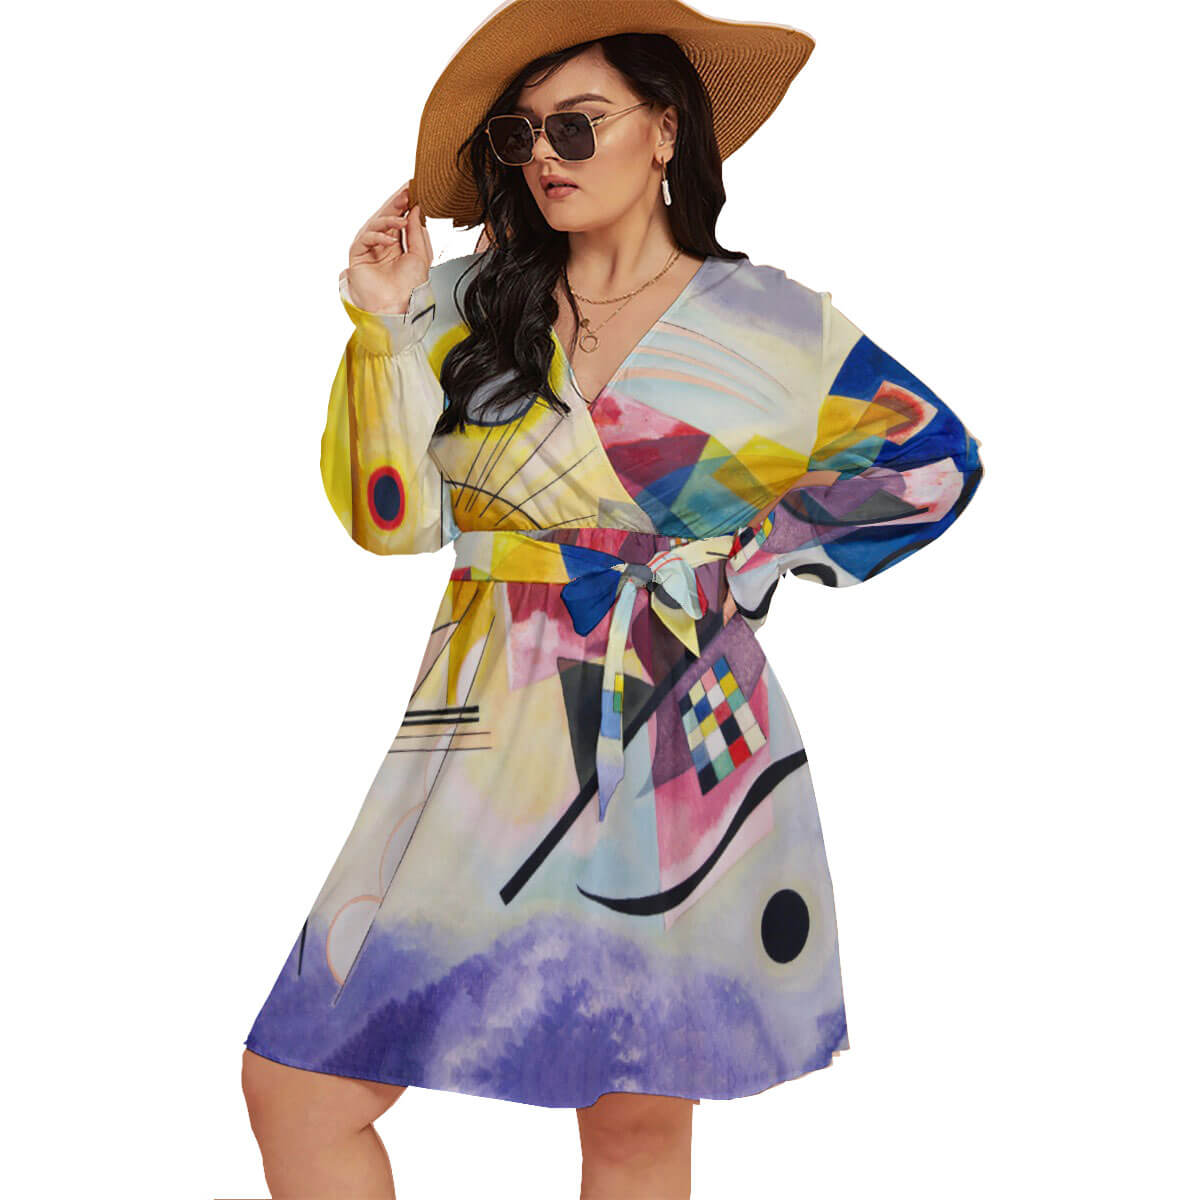 Colorful abstract waistband dress